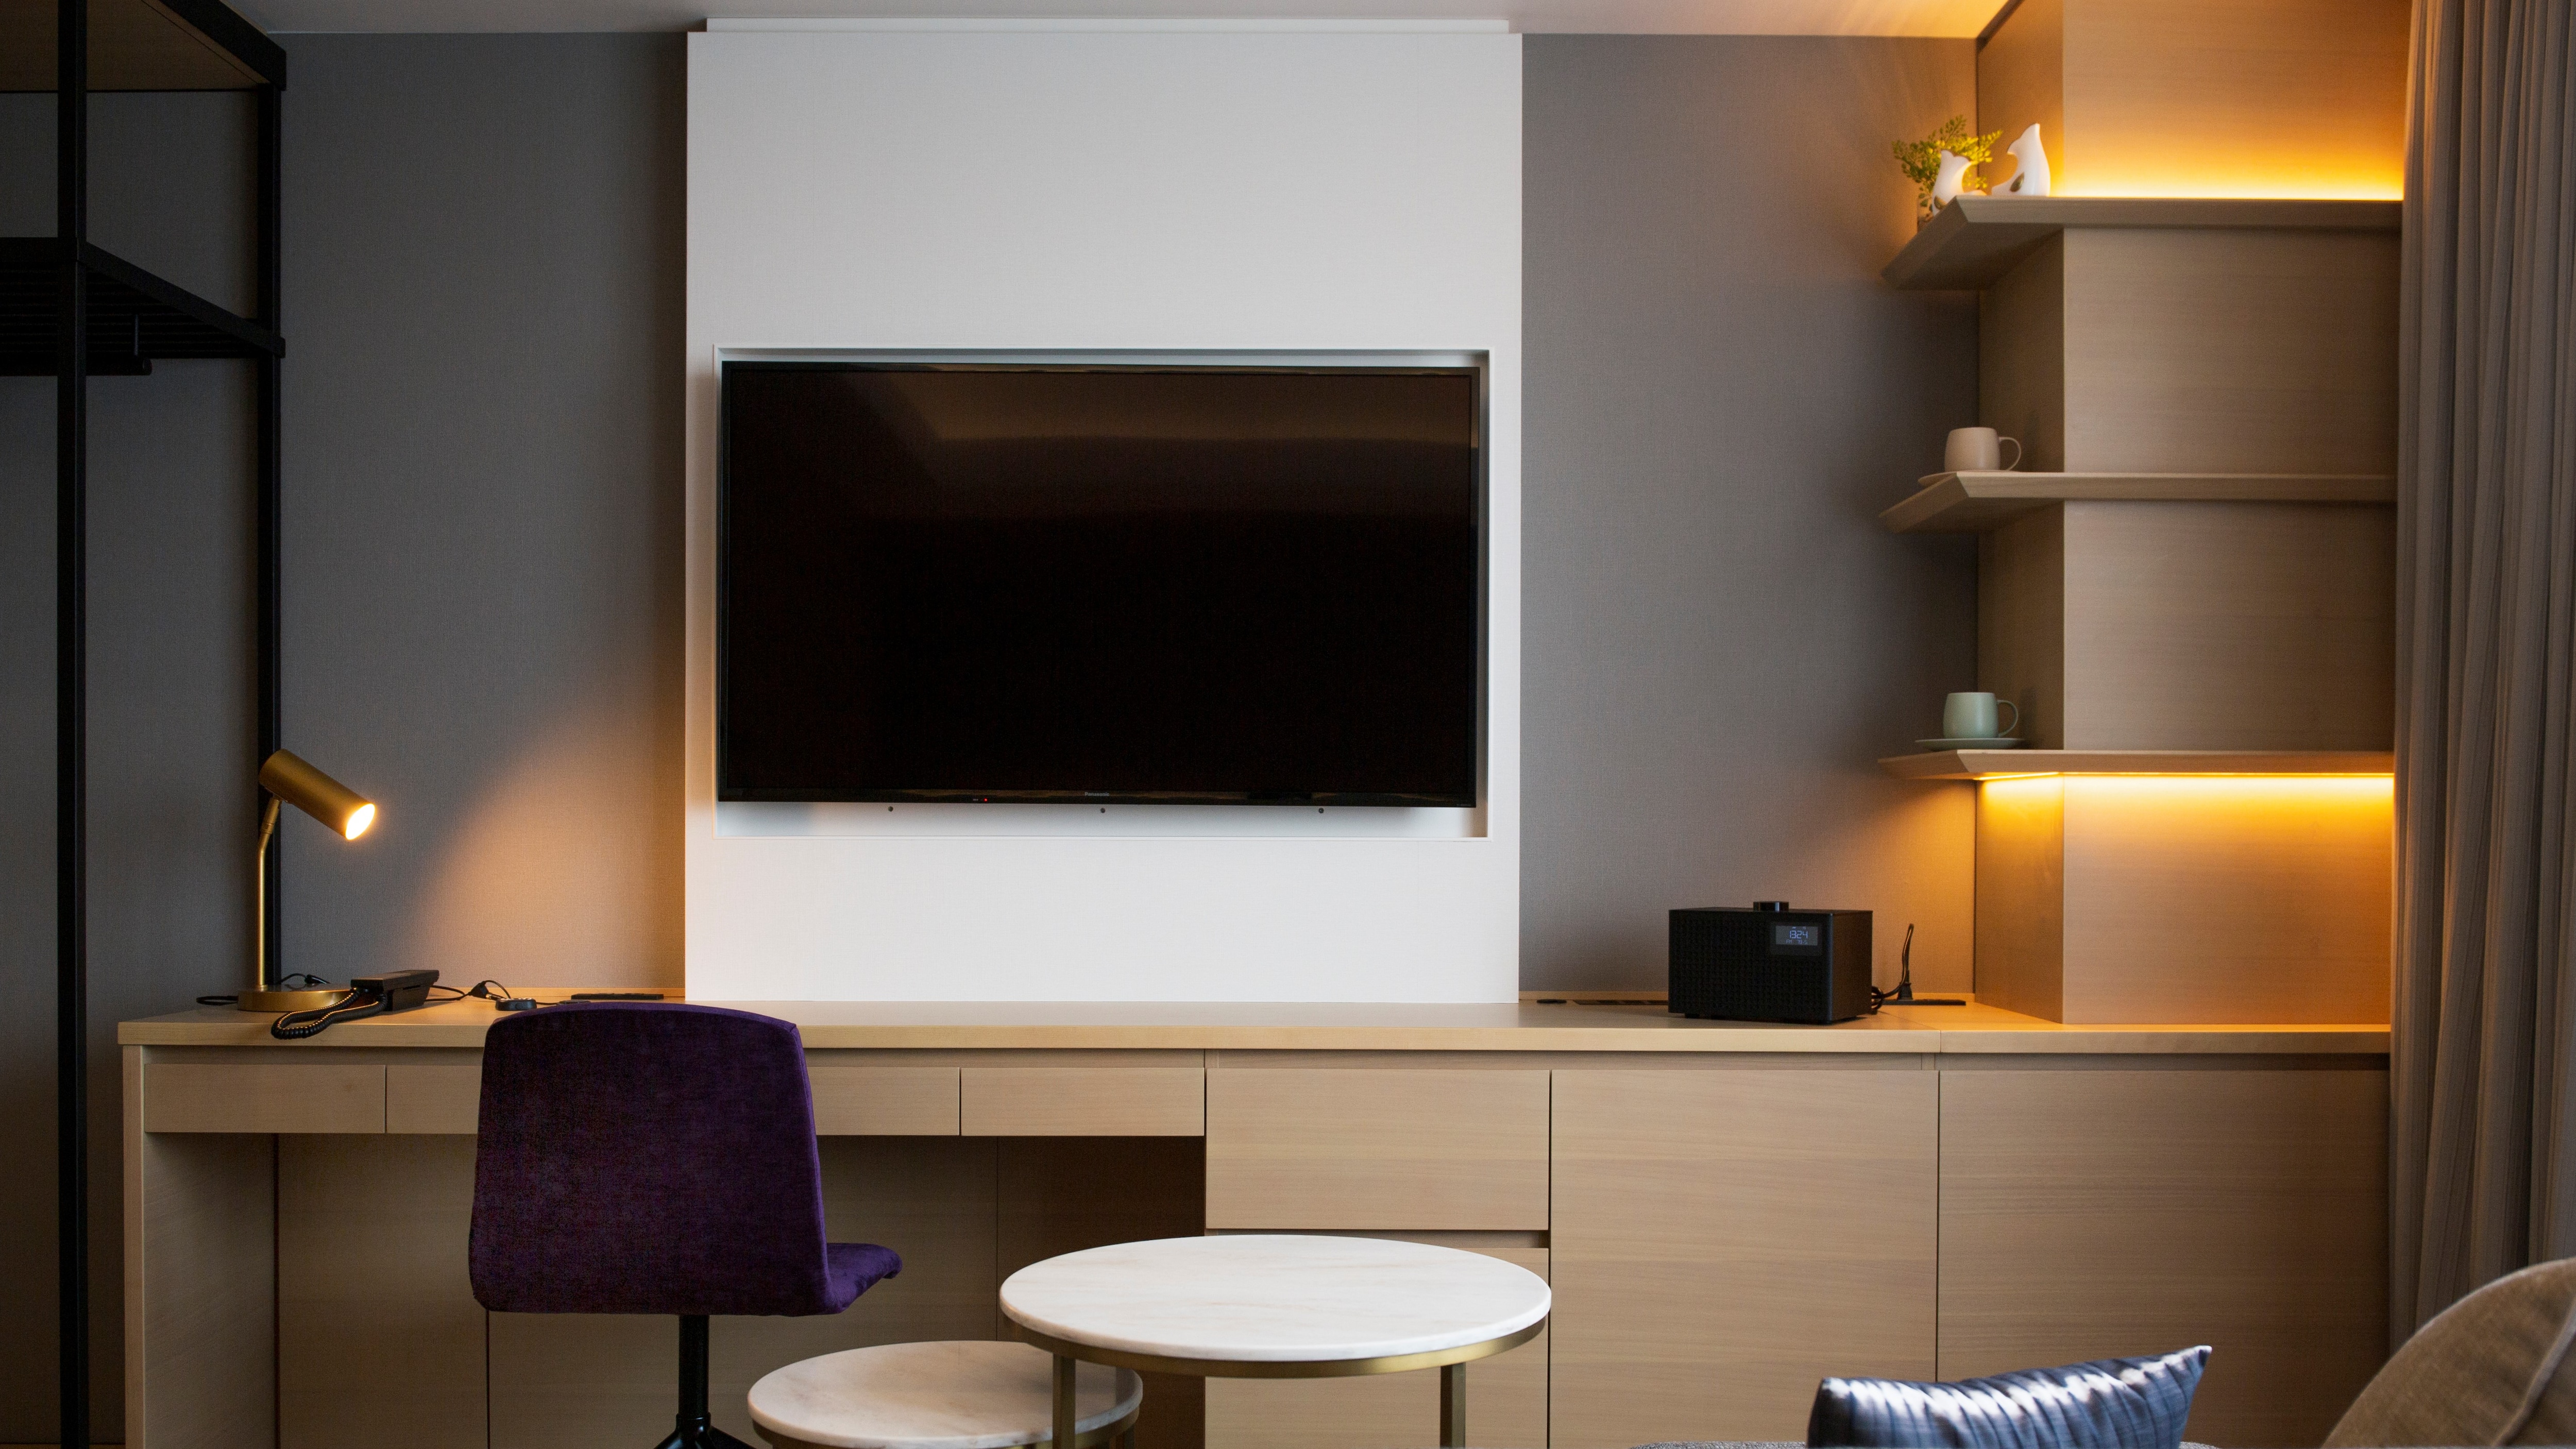 All rooms are equipped with 4K compatible 49-inch TVs